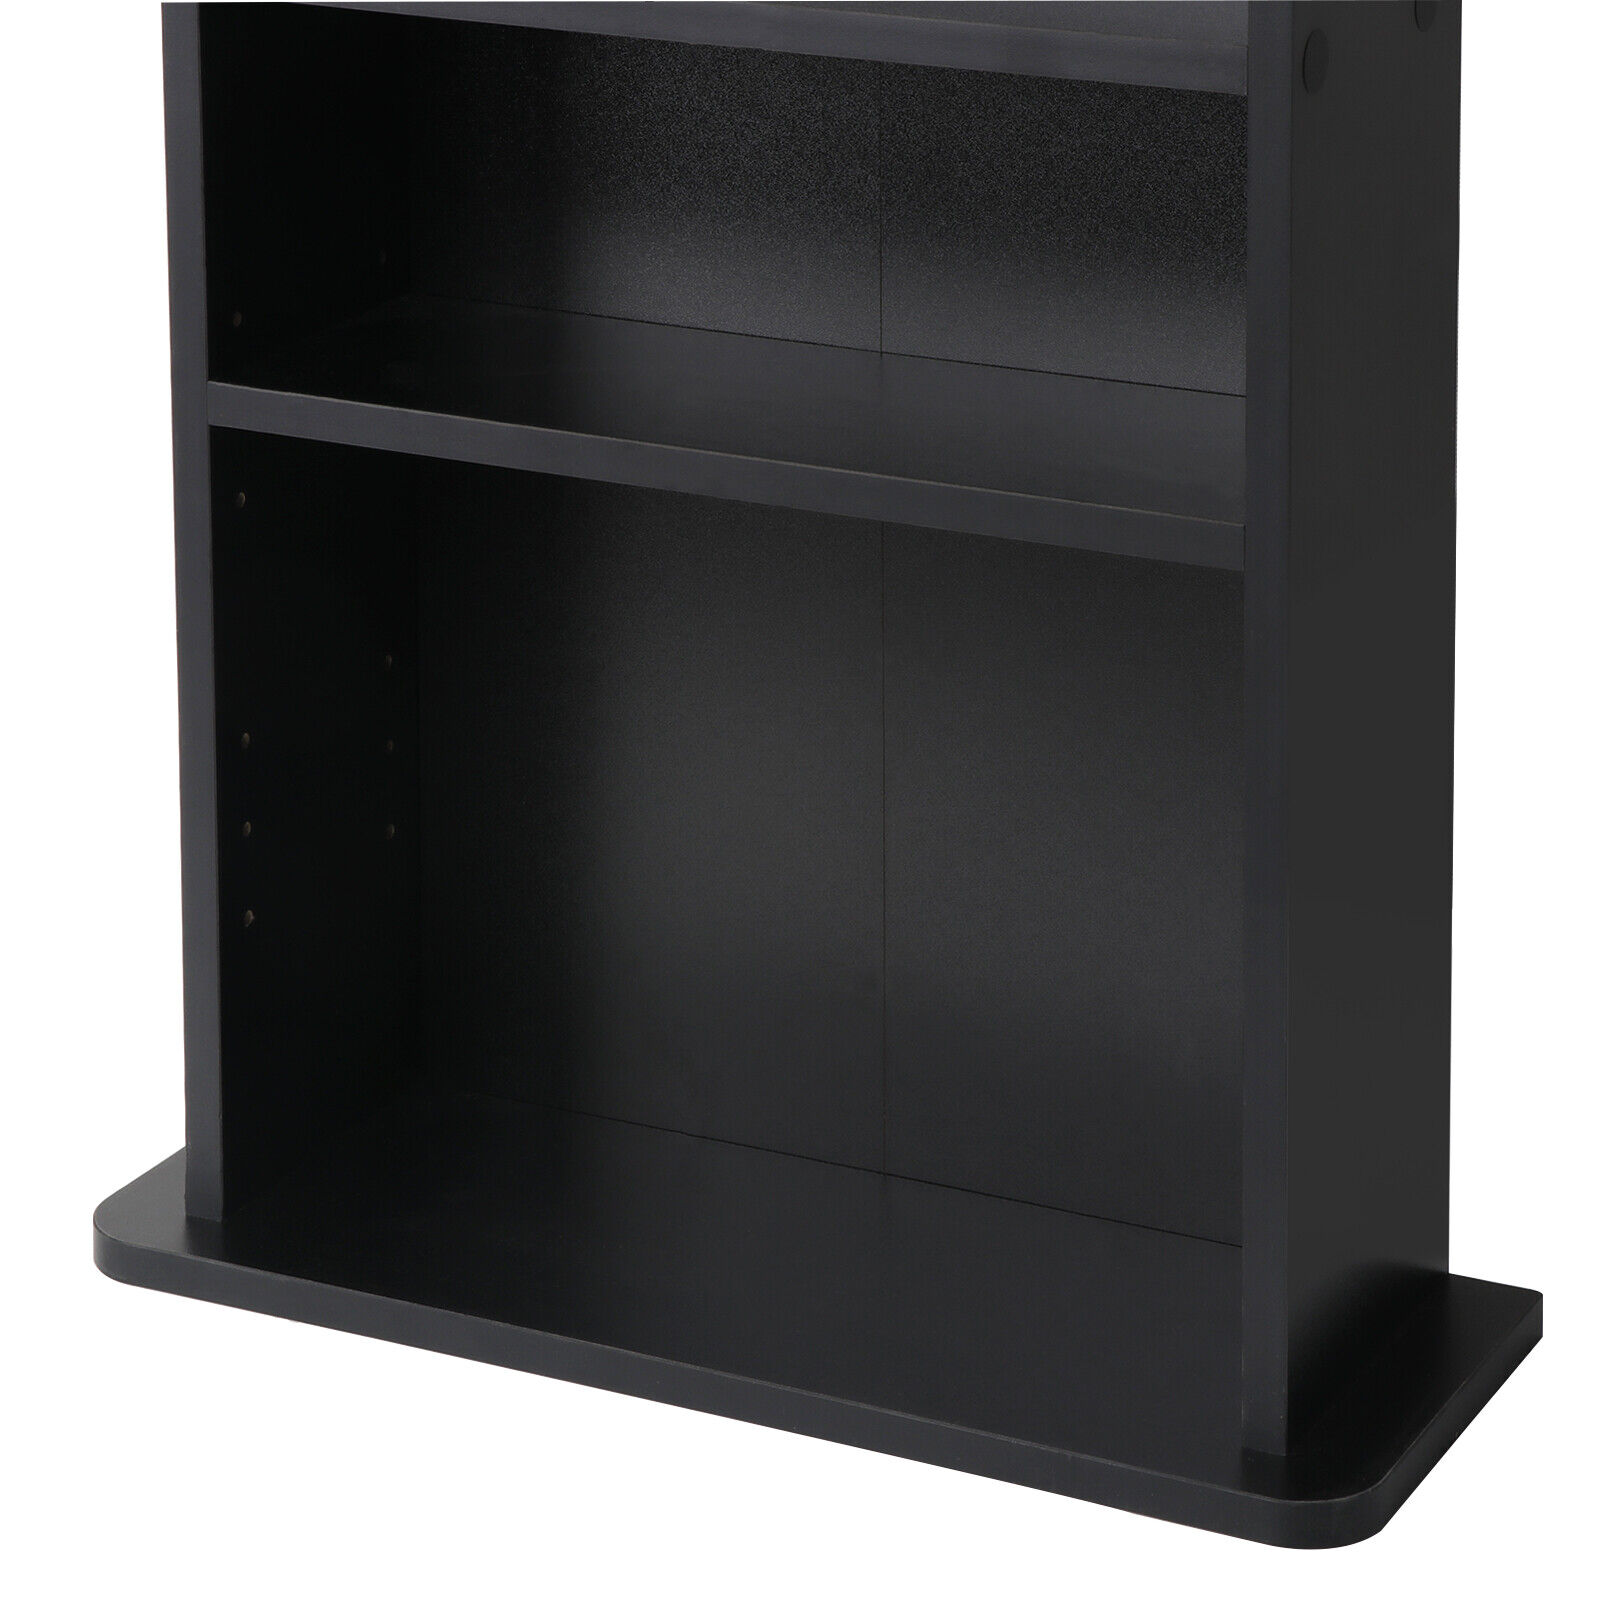 Great Choice Products Media Storage Cabinet Game Dvd Movie Tower Stable Organizer Stand 5 Shelves